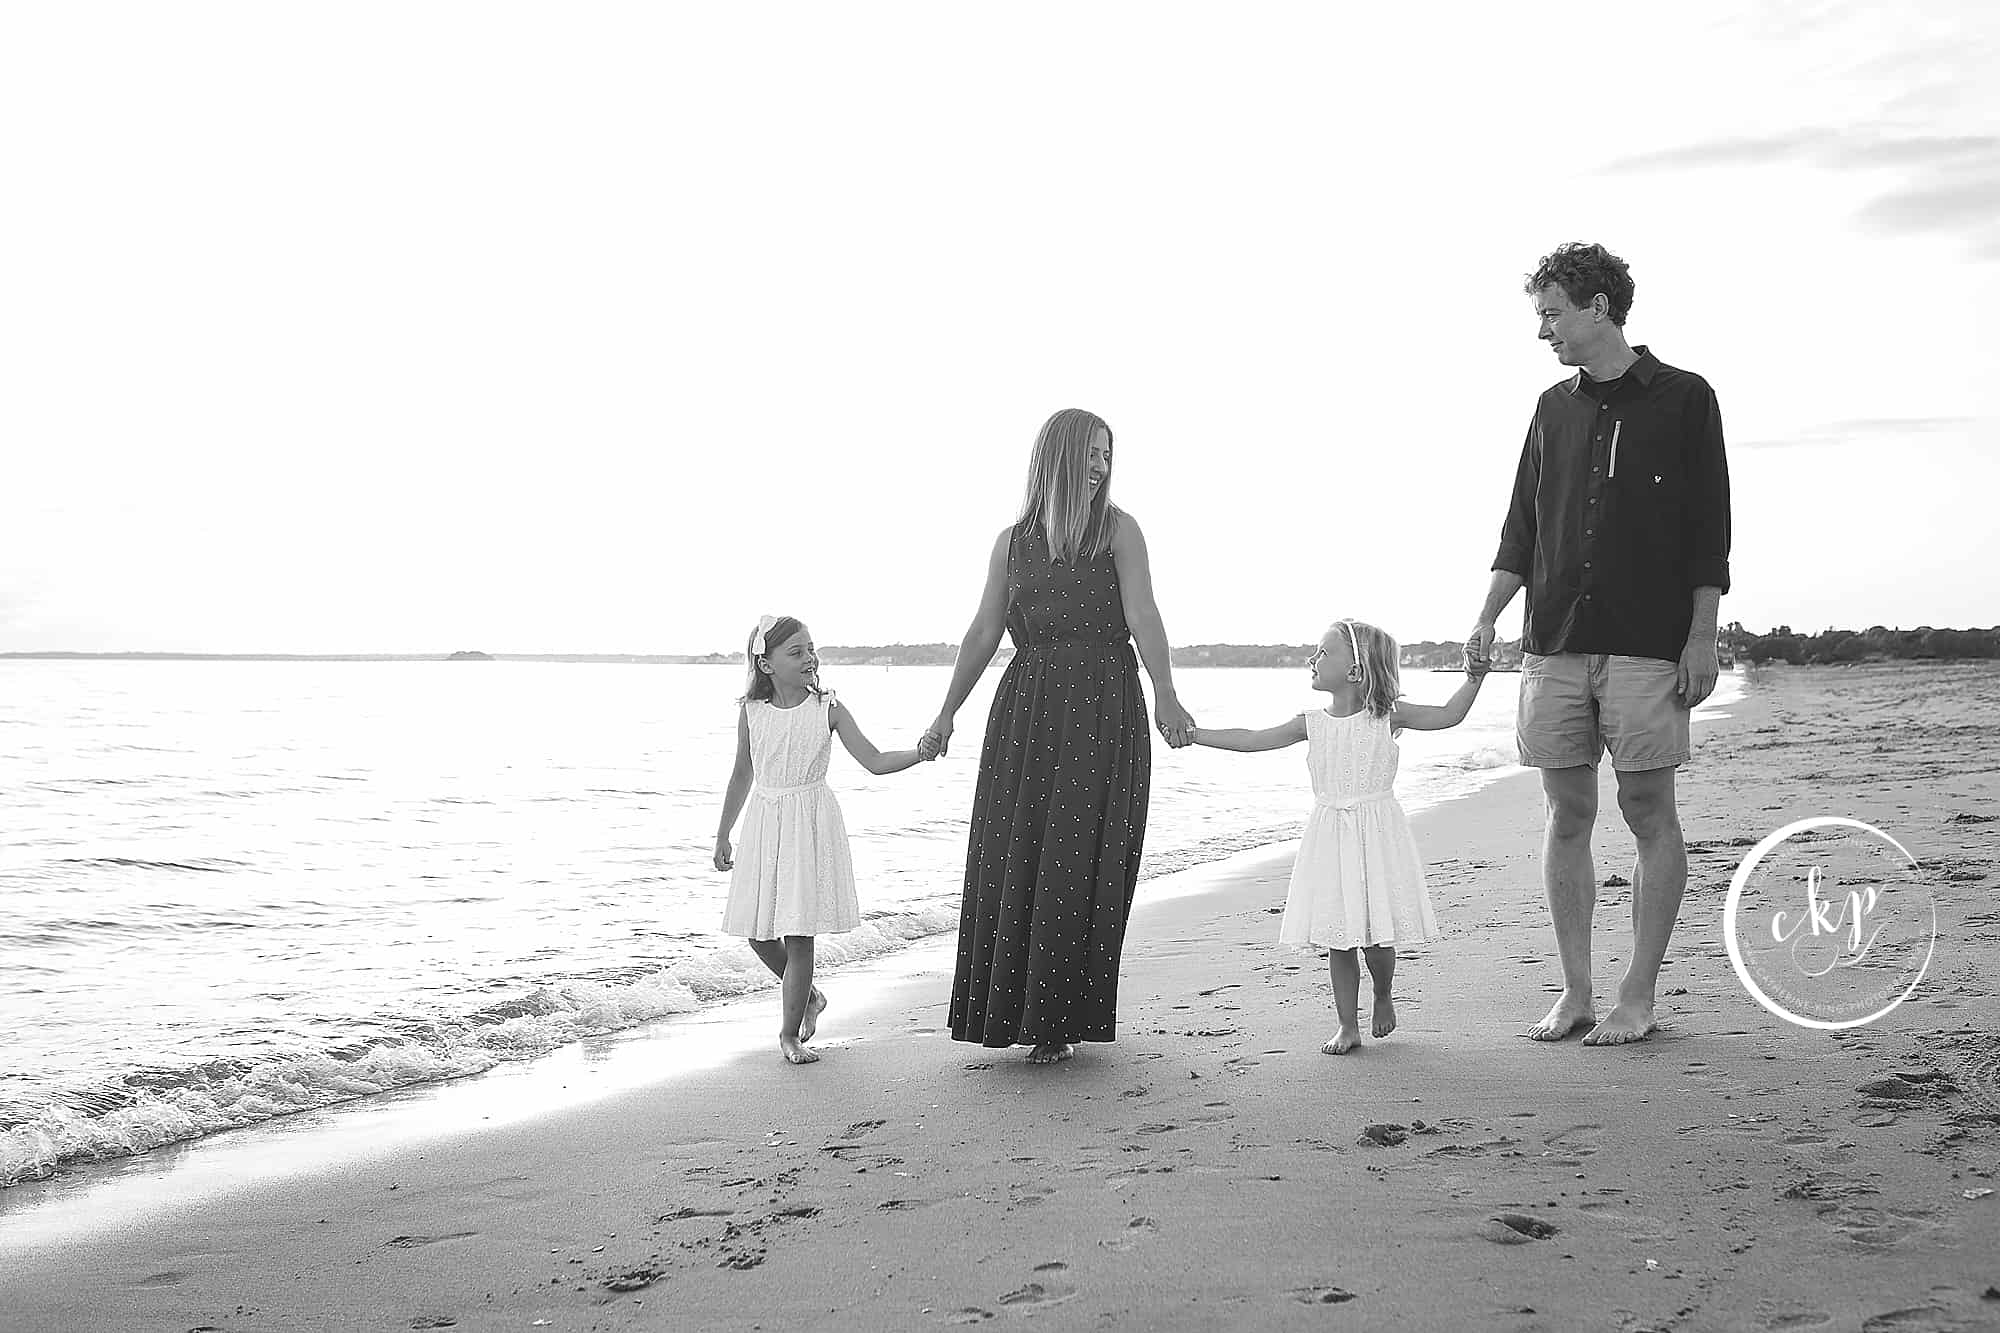 CT Shoreline Beach Sessions 2017 - part 1 |  CT Family Photography